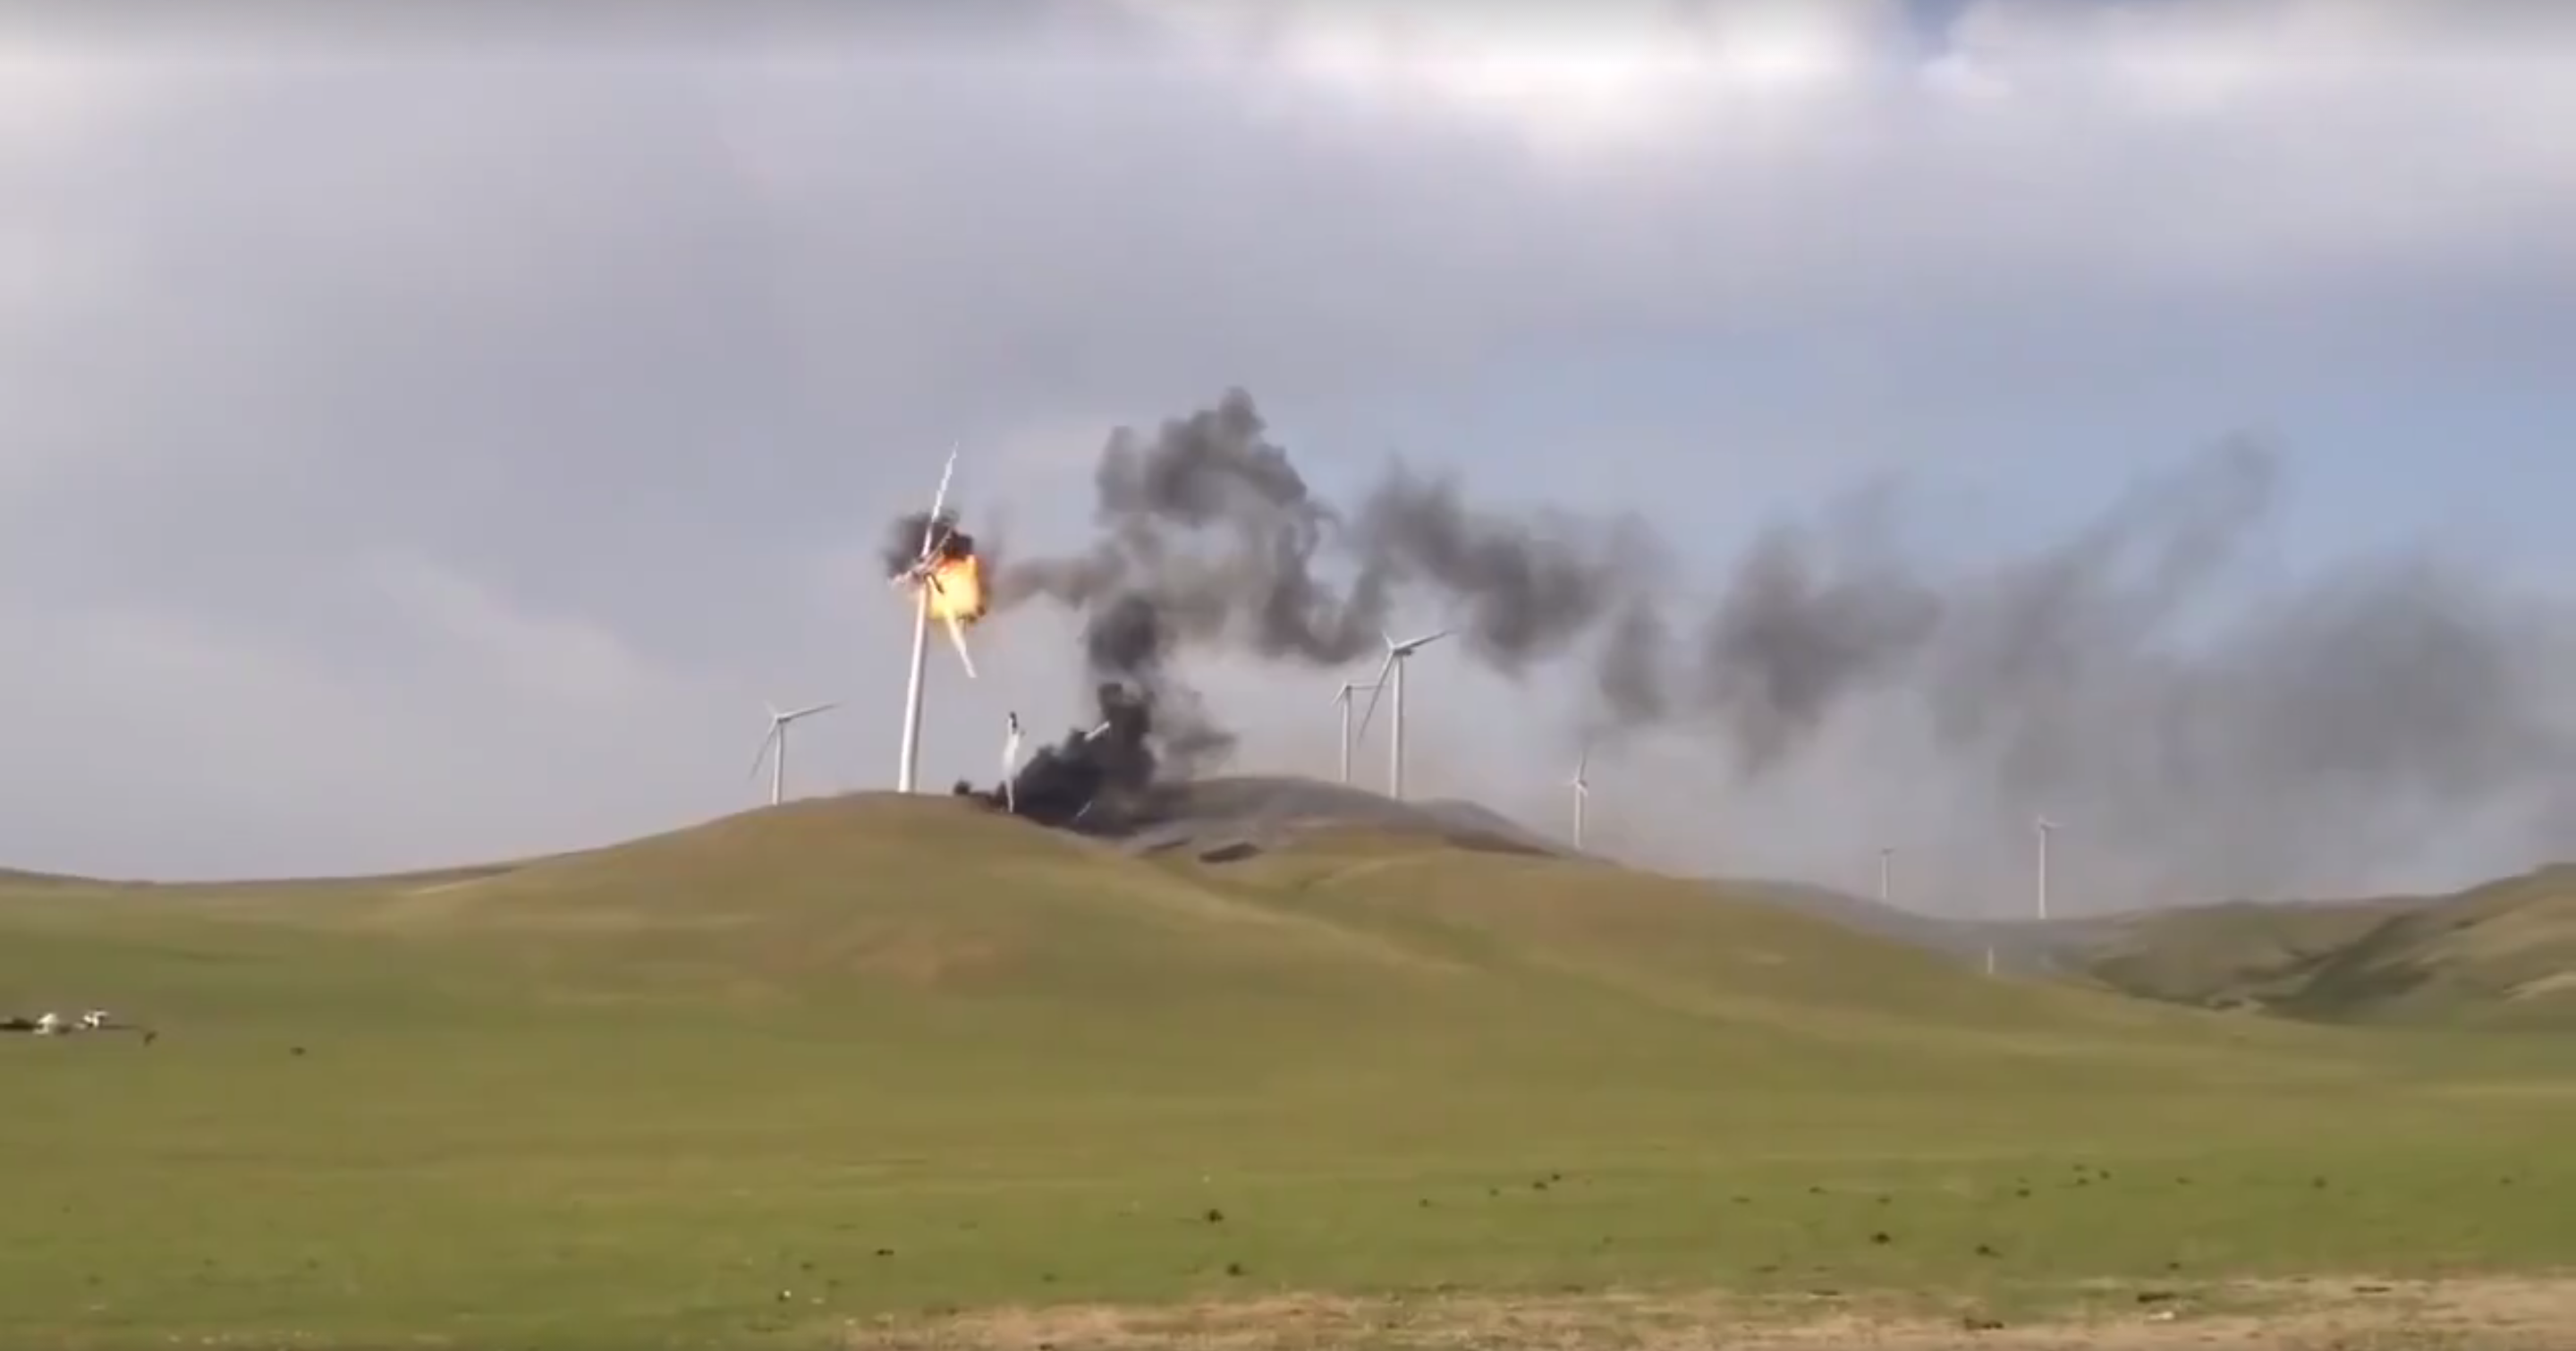 Wind Turbine Explodes, Catches Fire, Crashes and Burns — How About Blade-less Turbines Instead?